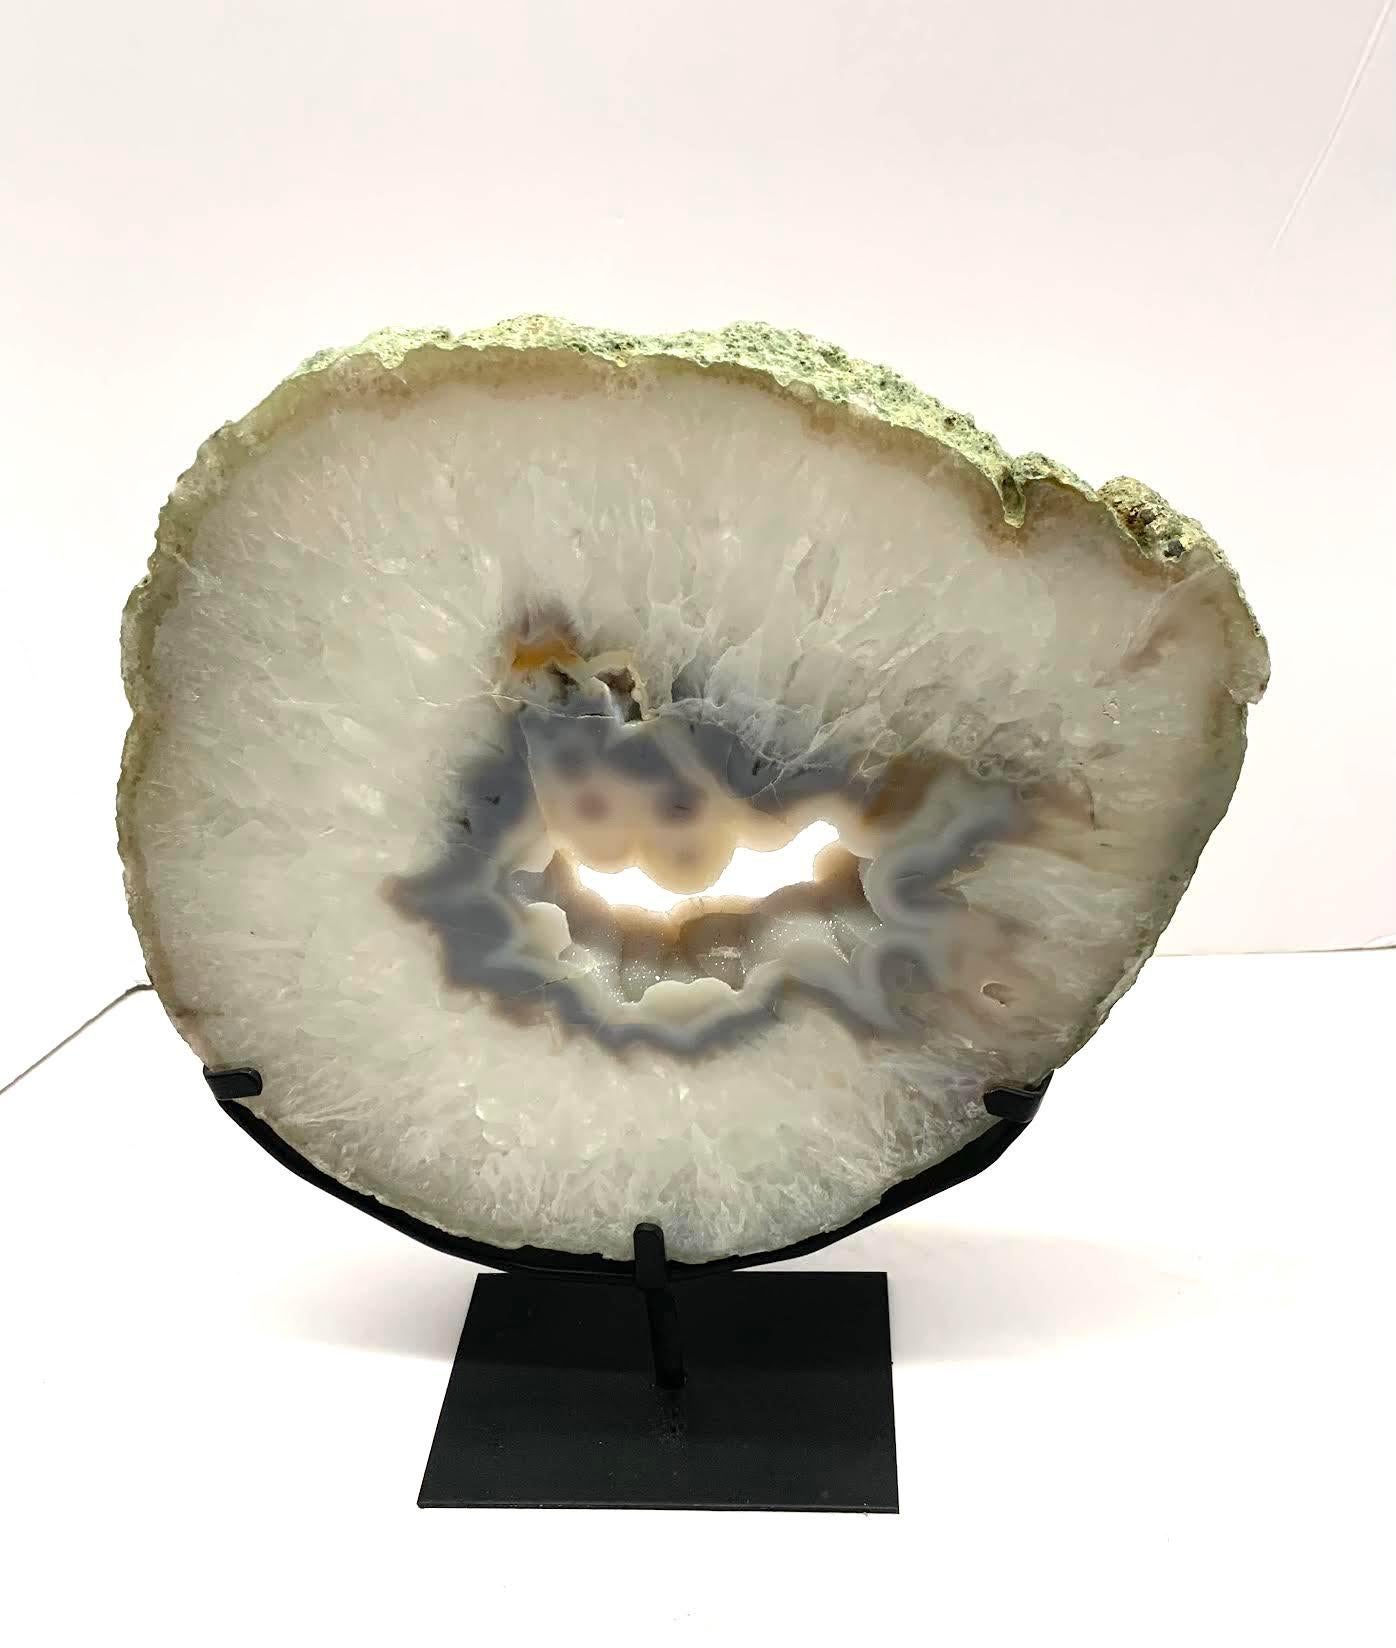 Prehistoric Brazilian thick agate geode on stand.
Center hole reveals beautiful natural silver crystals.
Stand measures 6